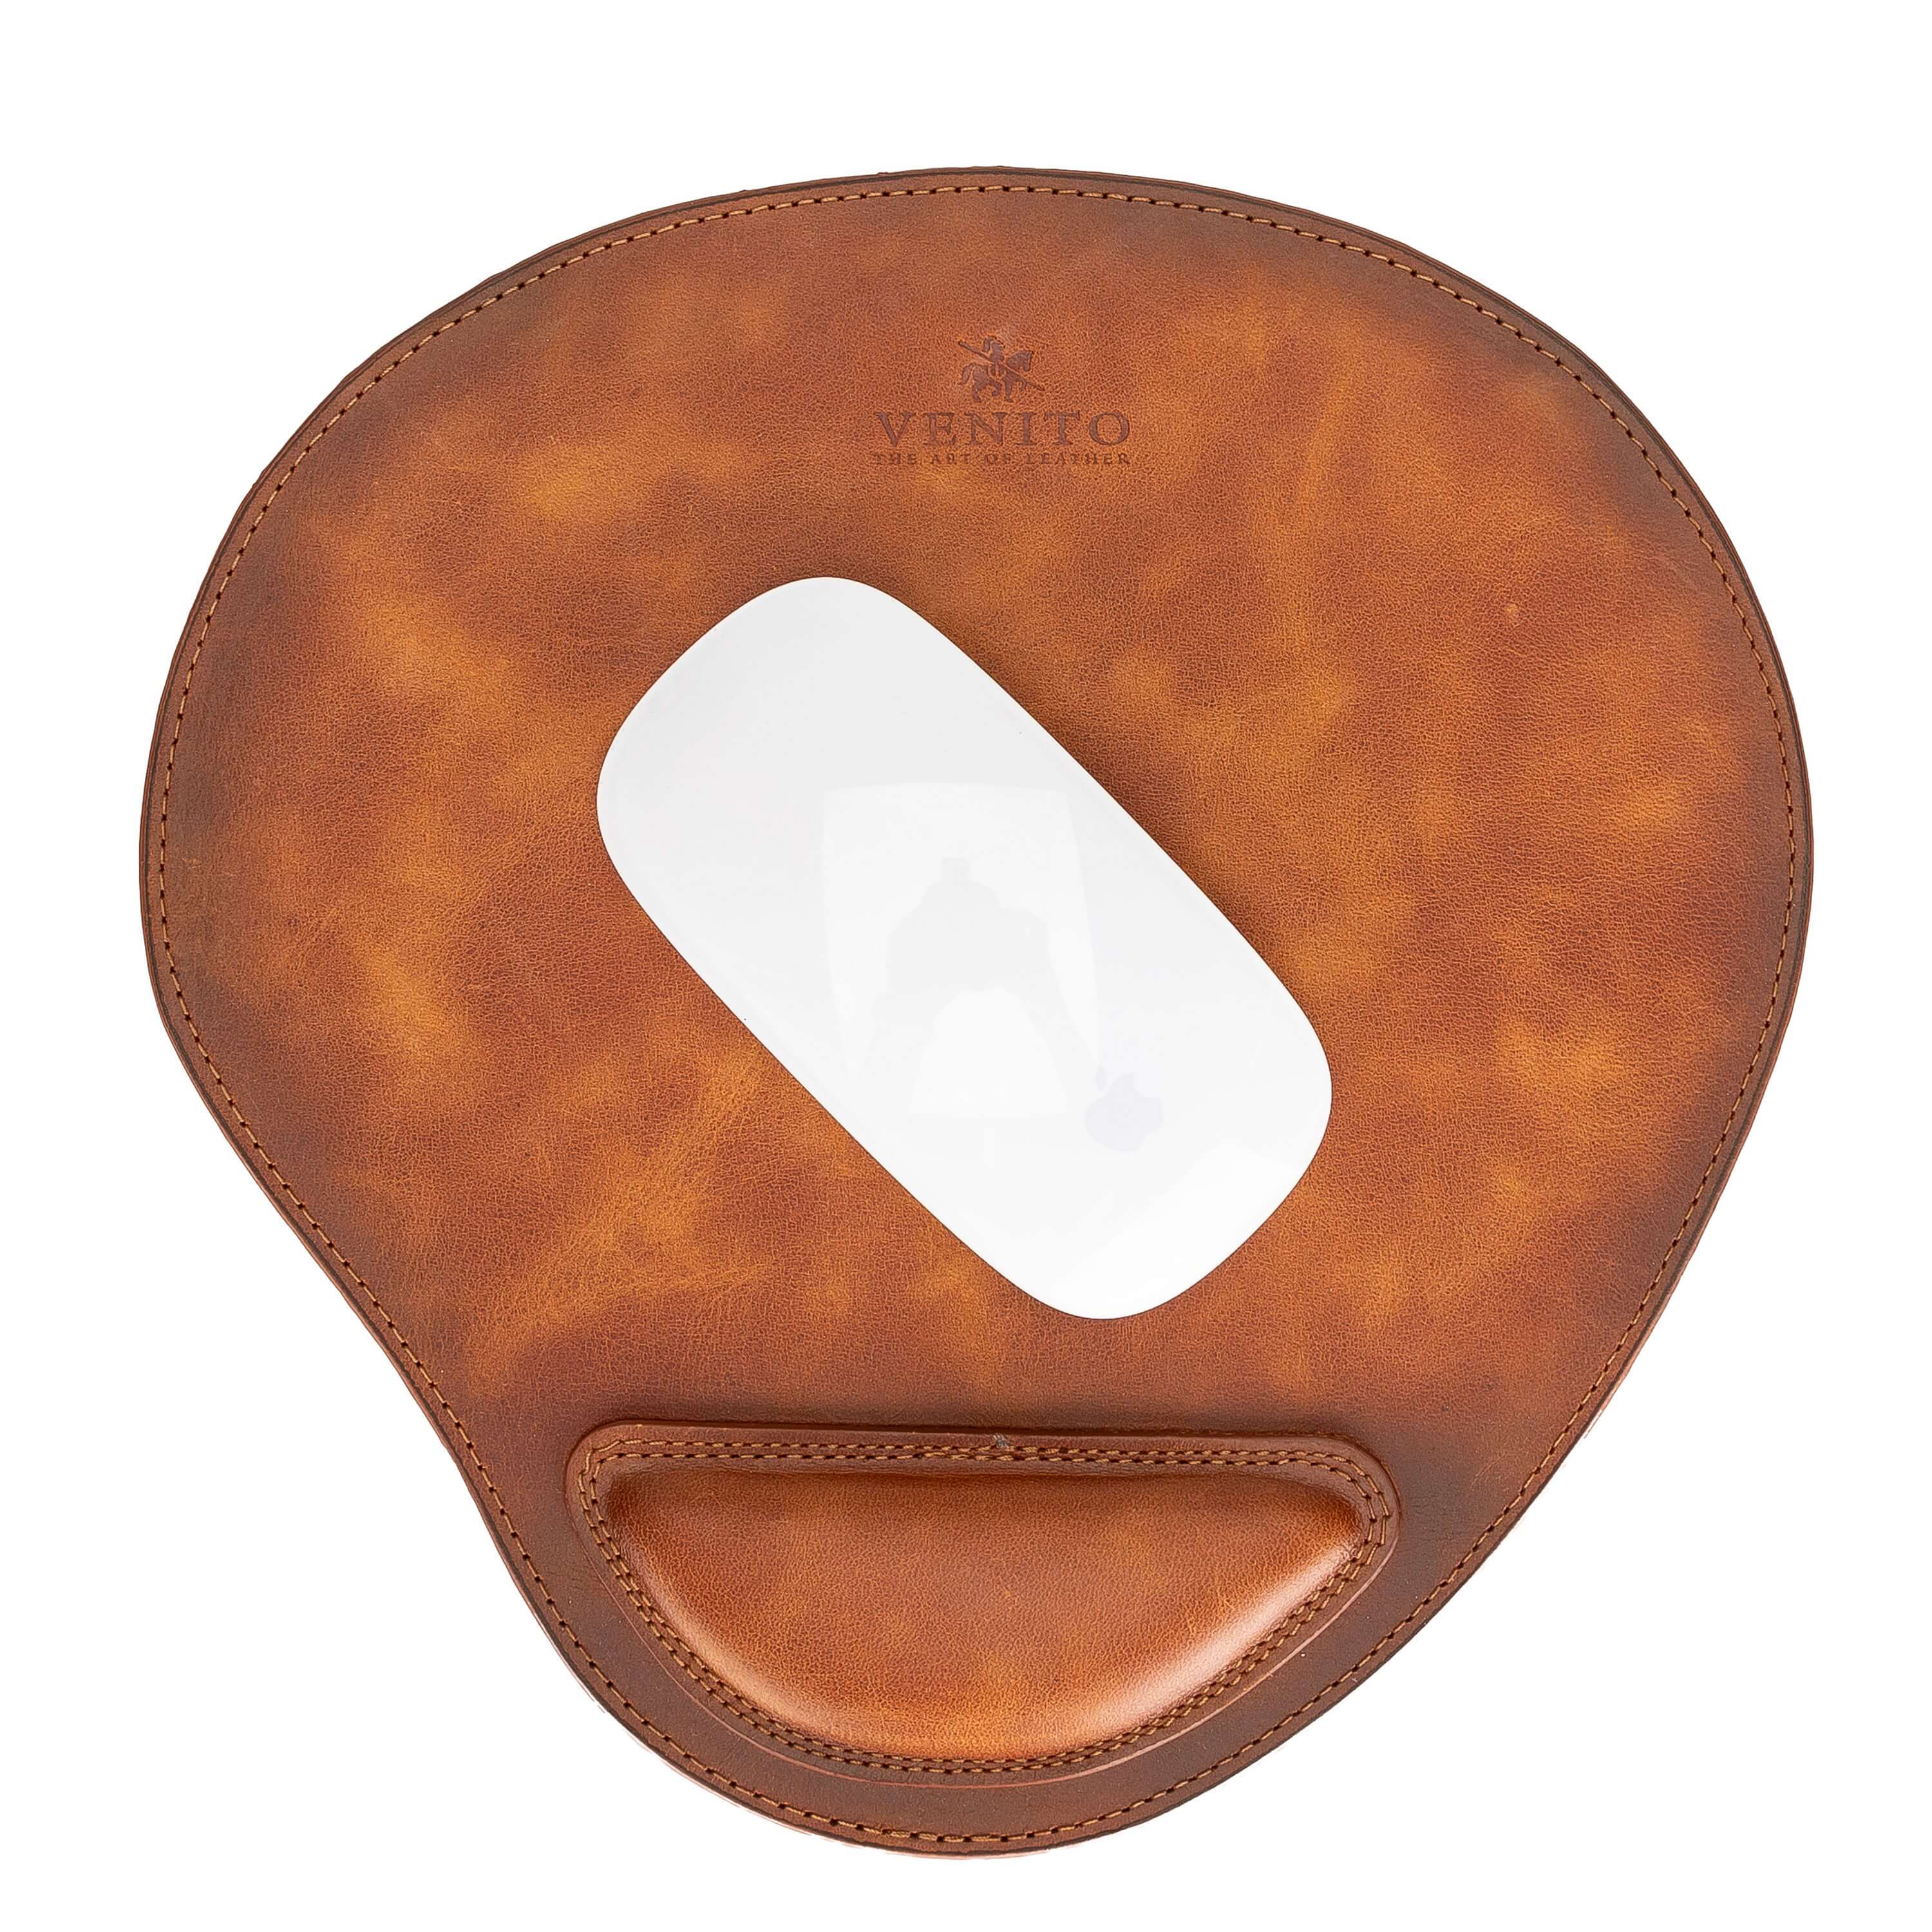 Leather Mouse Pad, Leather Mouse Mat, Mousepad, Free Personalization,  Custom Leather Mat 